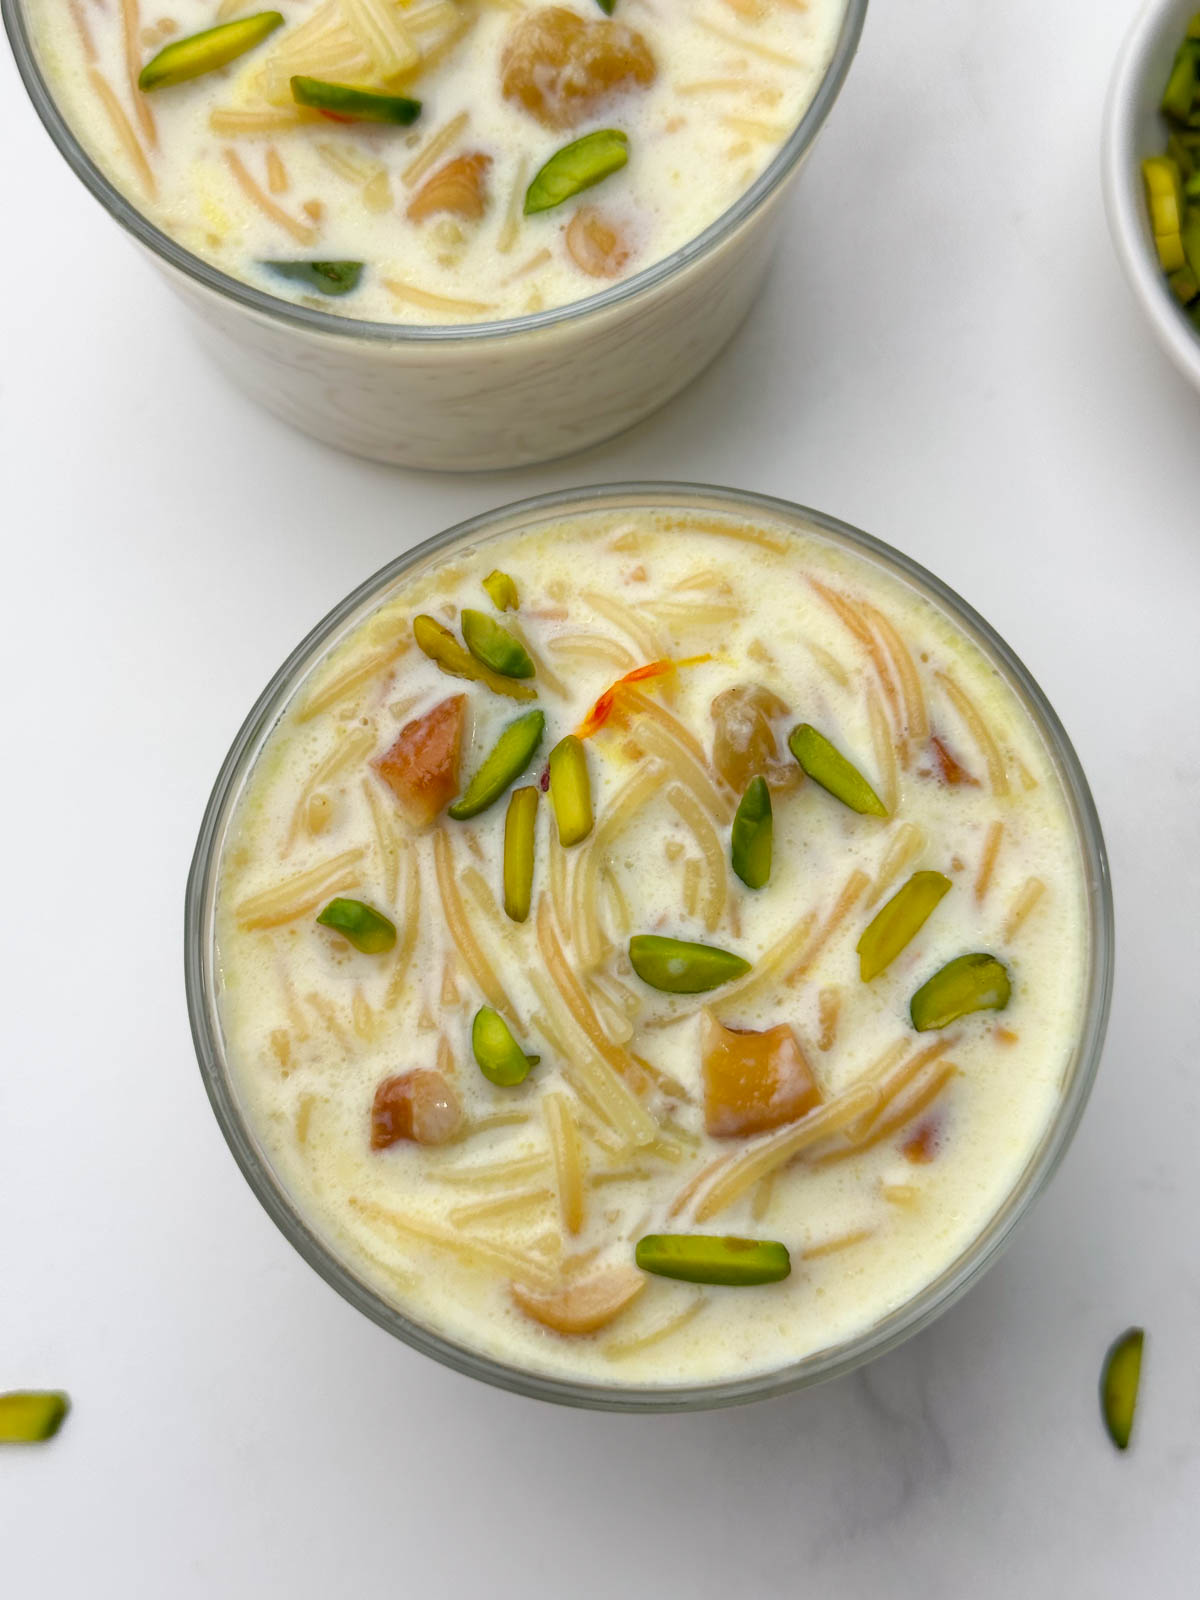 vermicelli kheer (semiya payasam) served in a bowl and pista on the side